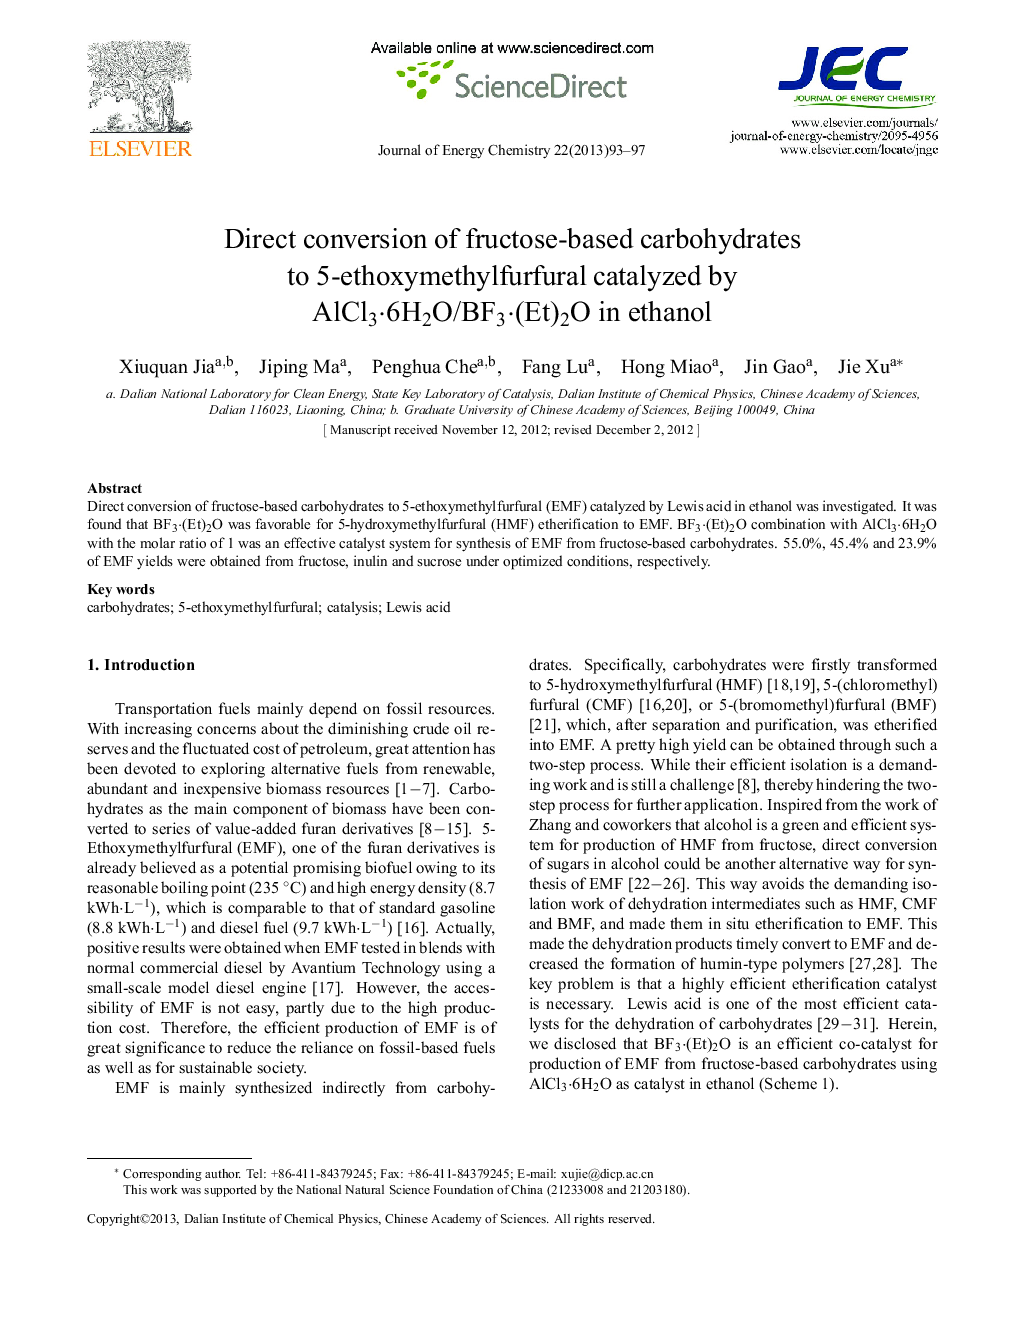 Direct conversion of fructose-based carbohydrates to 5-ethoxymethylfurfural catalyzed by AlCl3·6H2O/BF3·(Et)2O in ethanol 